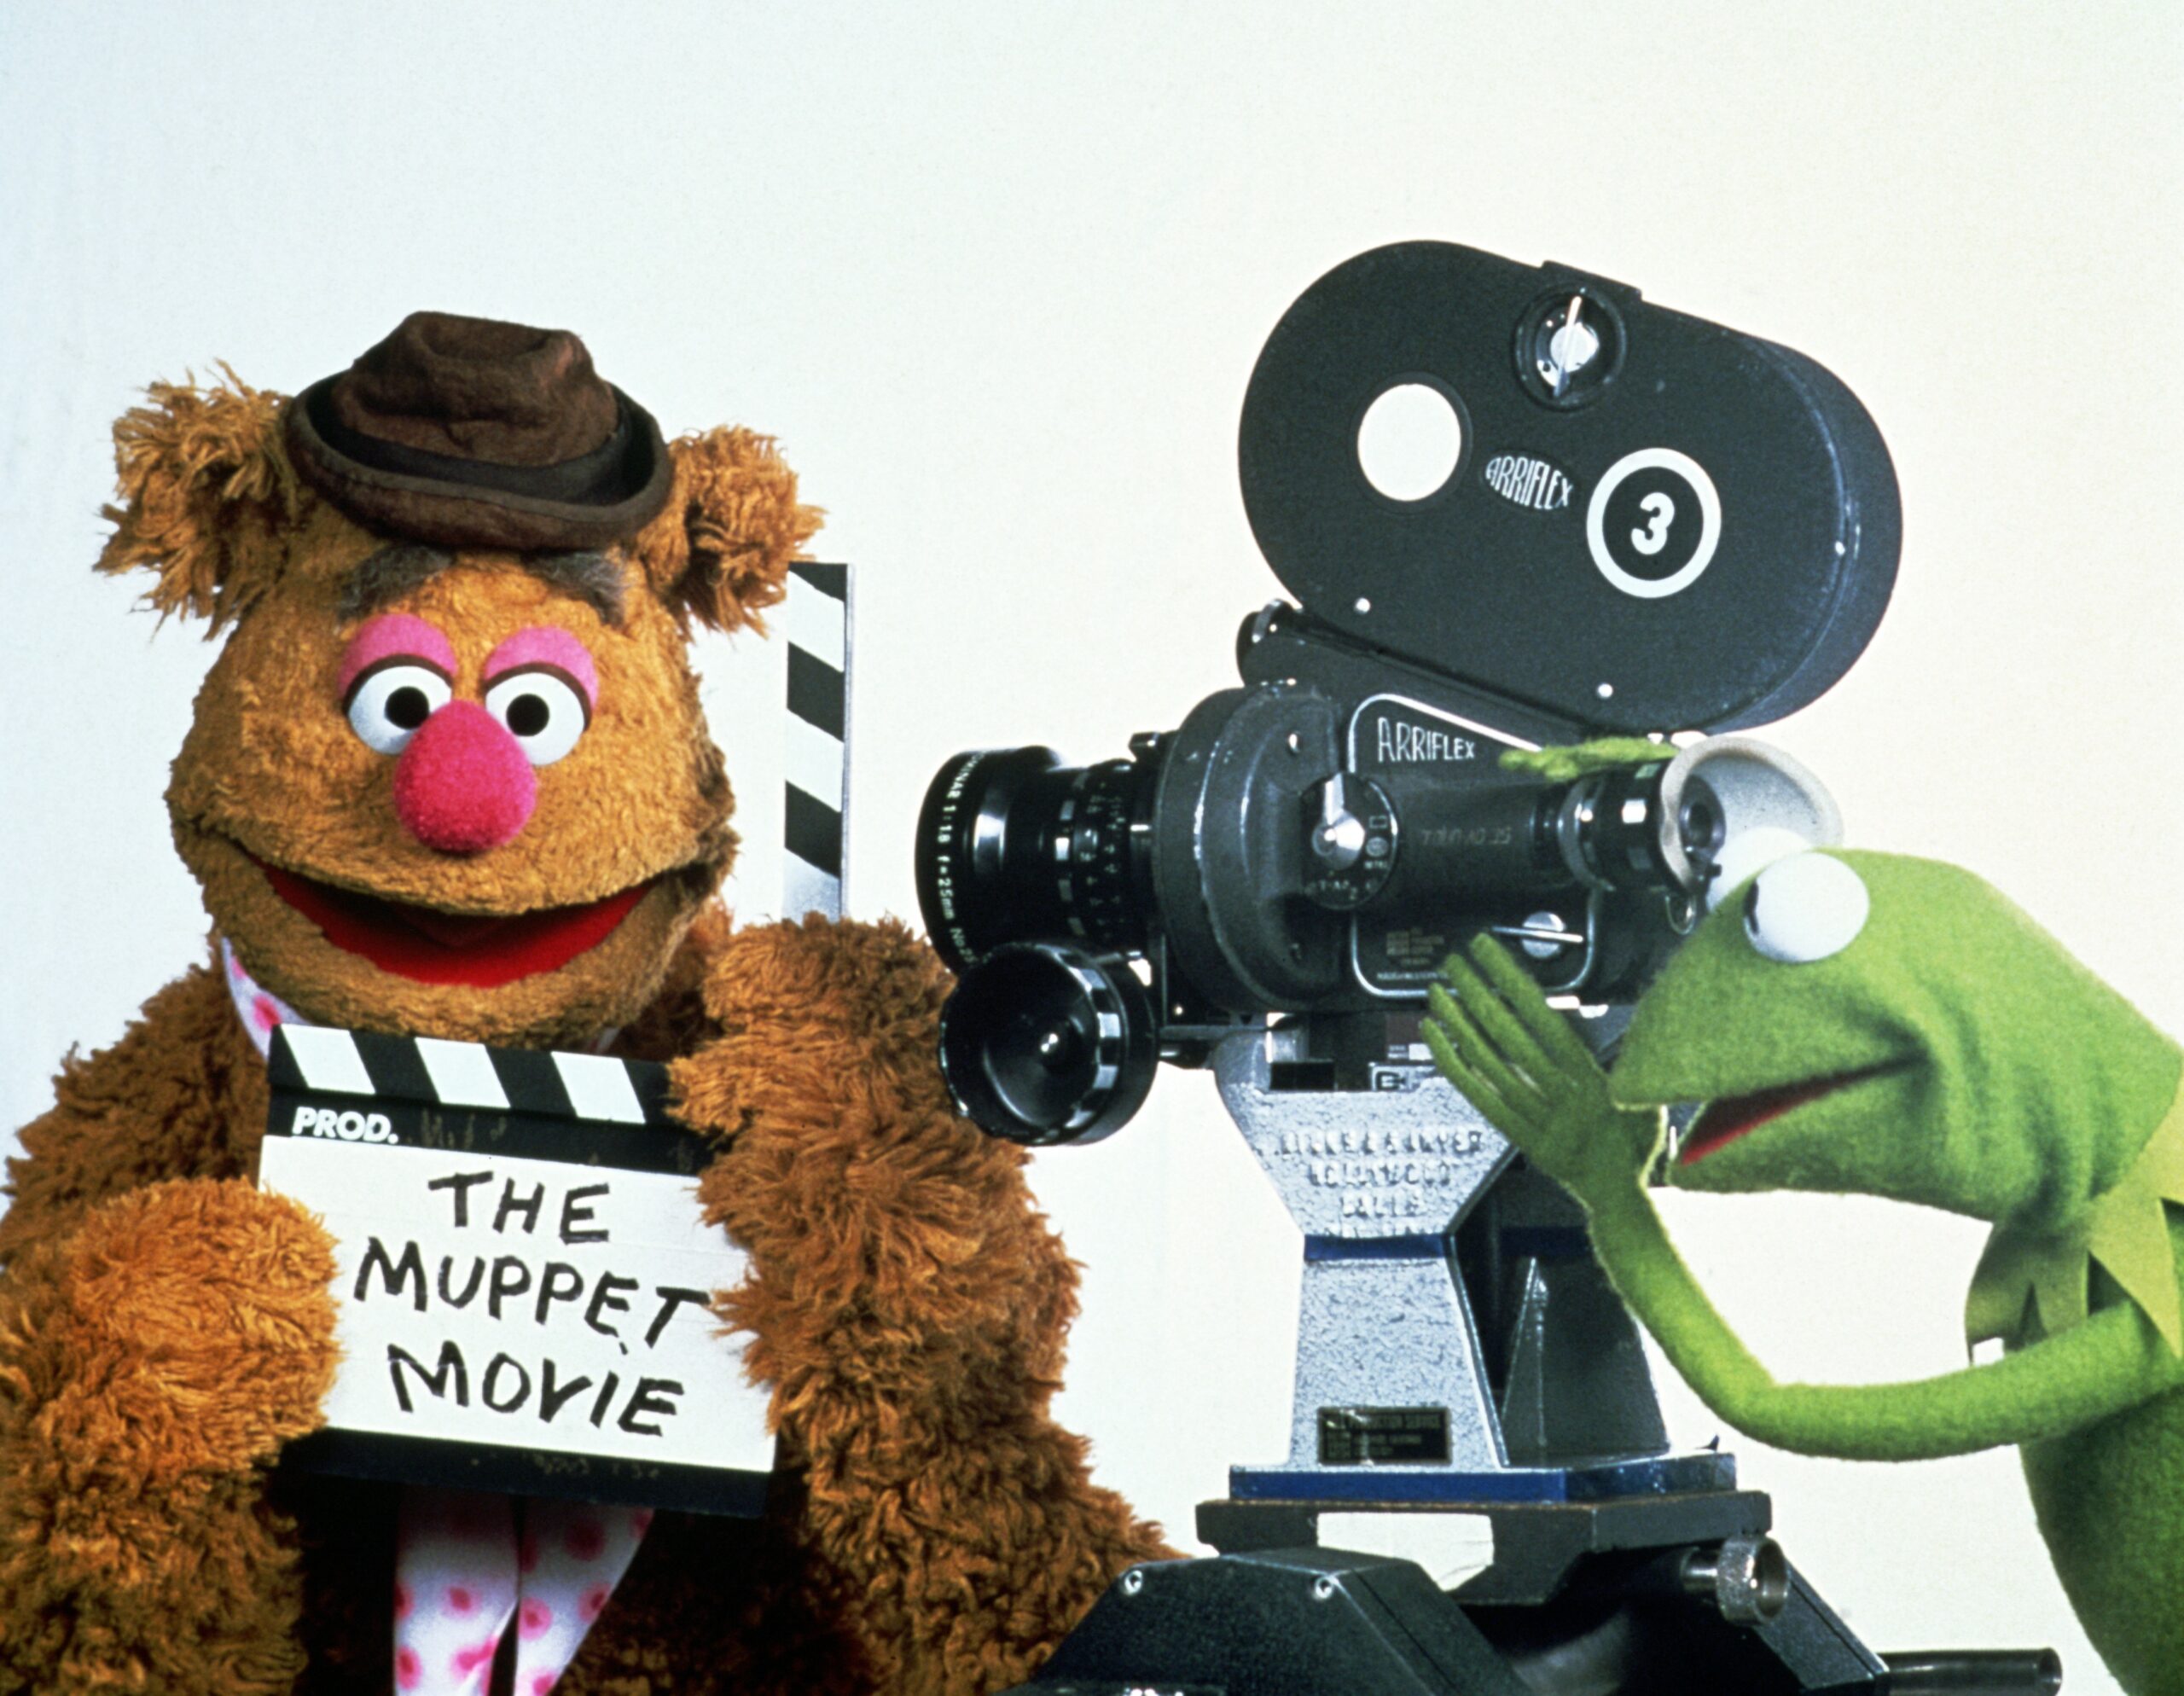 The Muppet Movie Marks 45th Anniversary